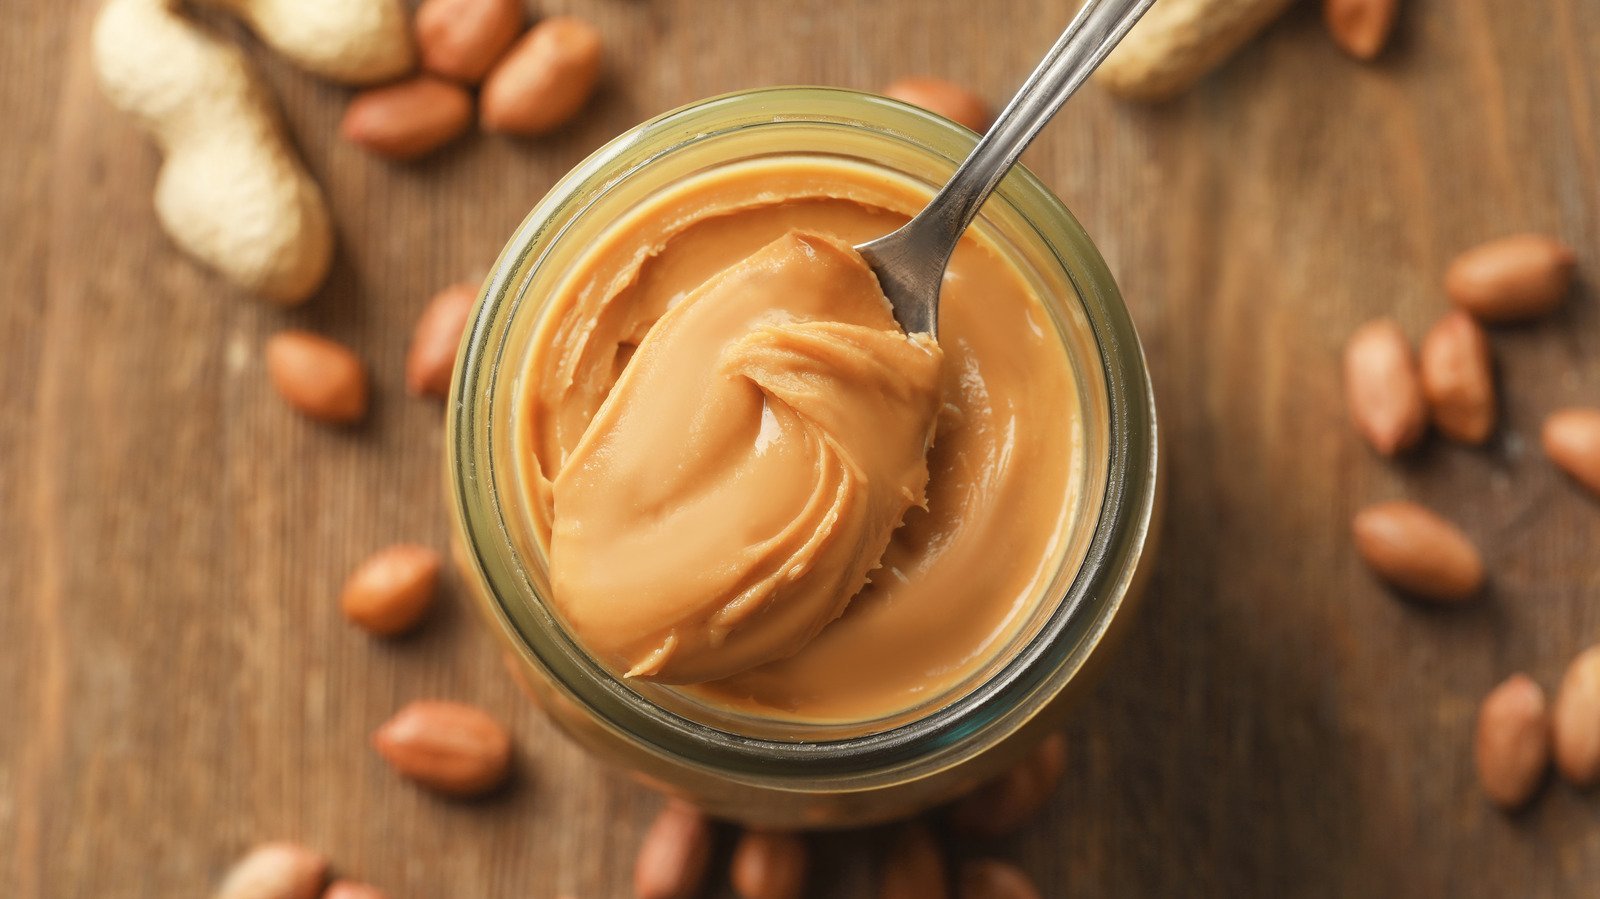 What Really Happens To Your Body When You Eat Peanut Butter Every Day